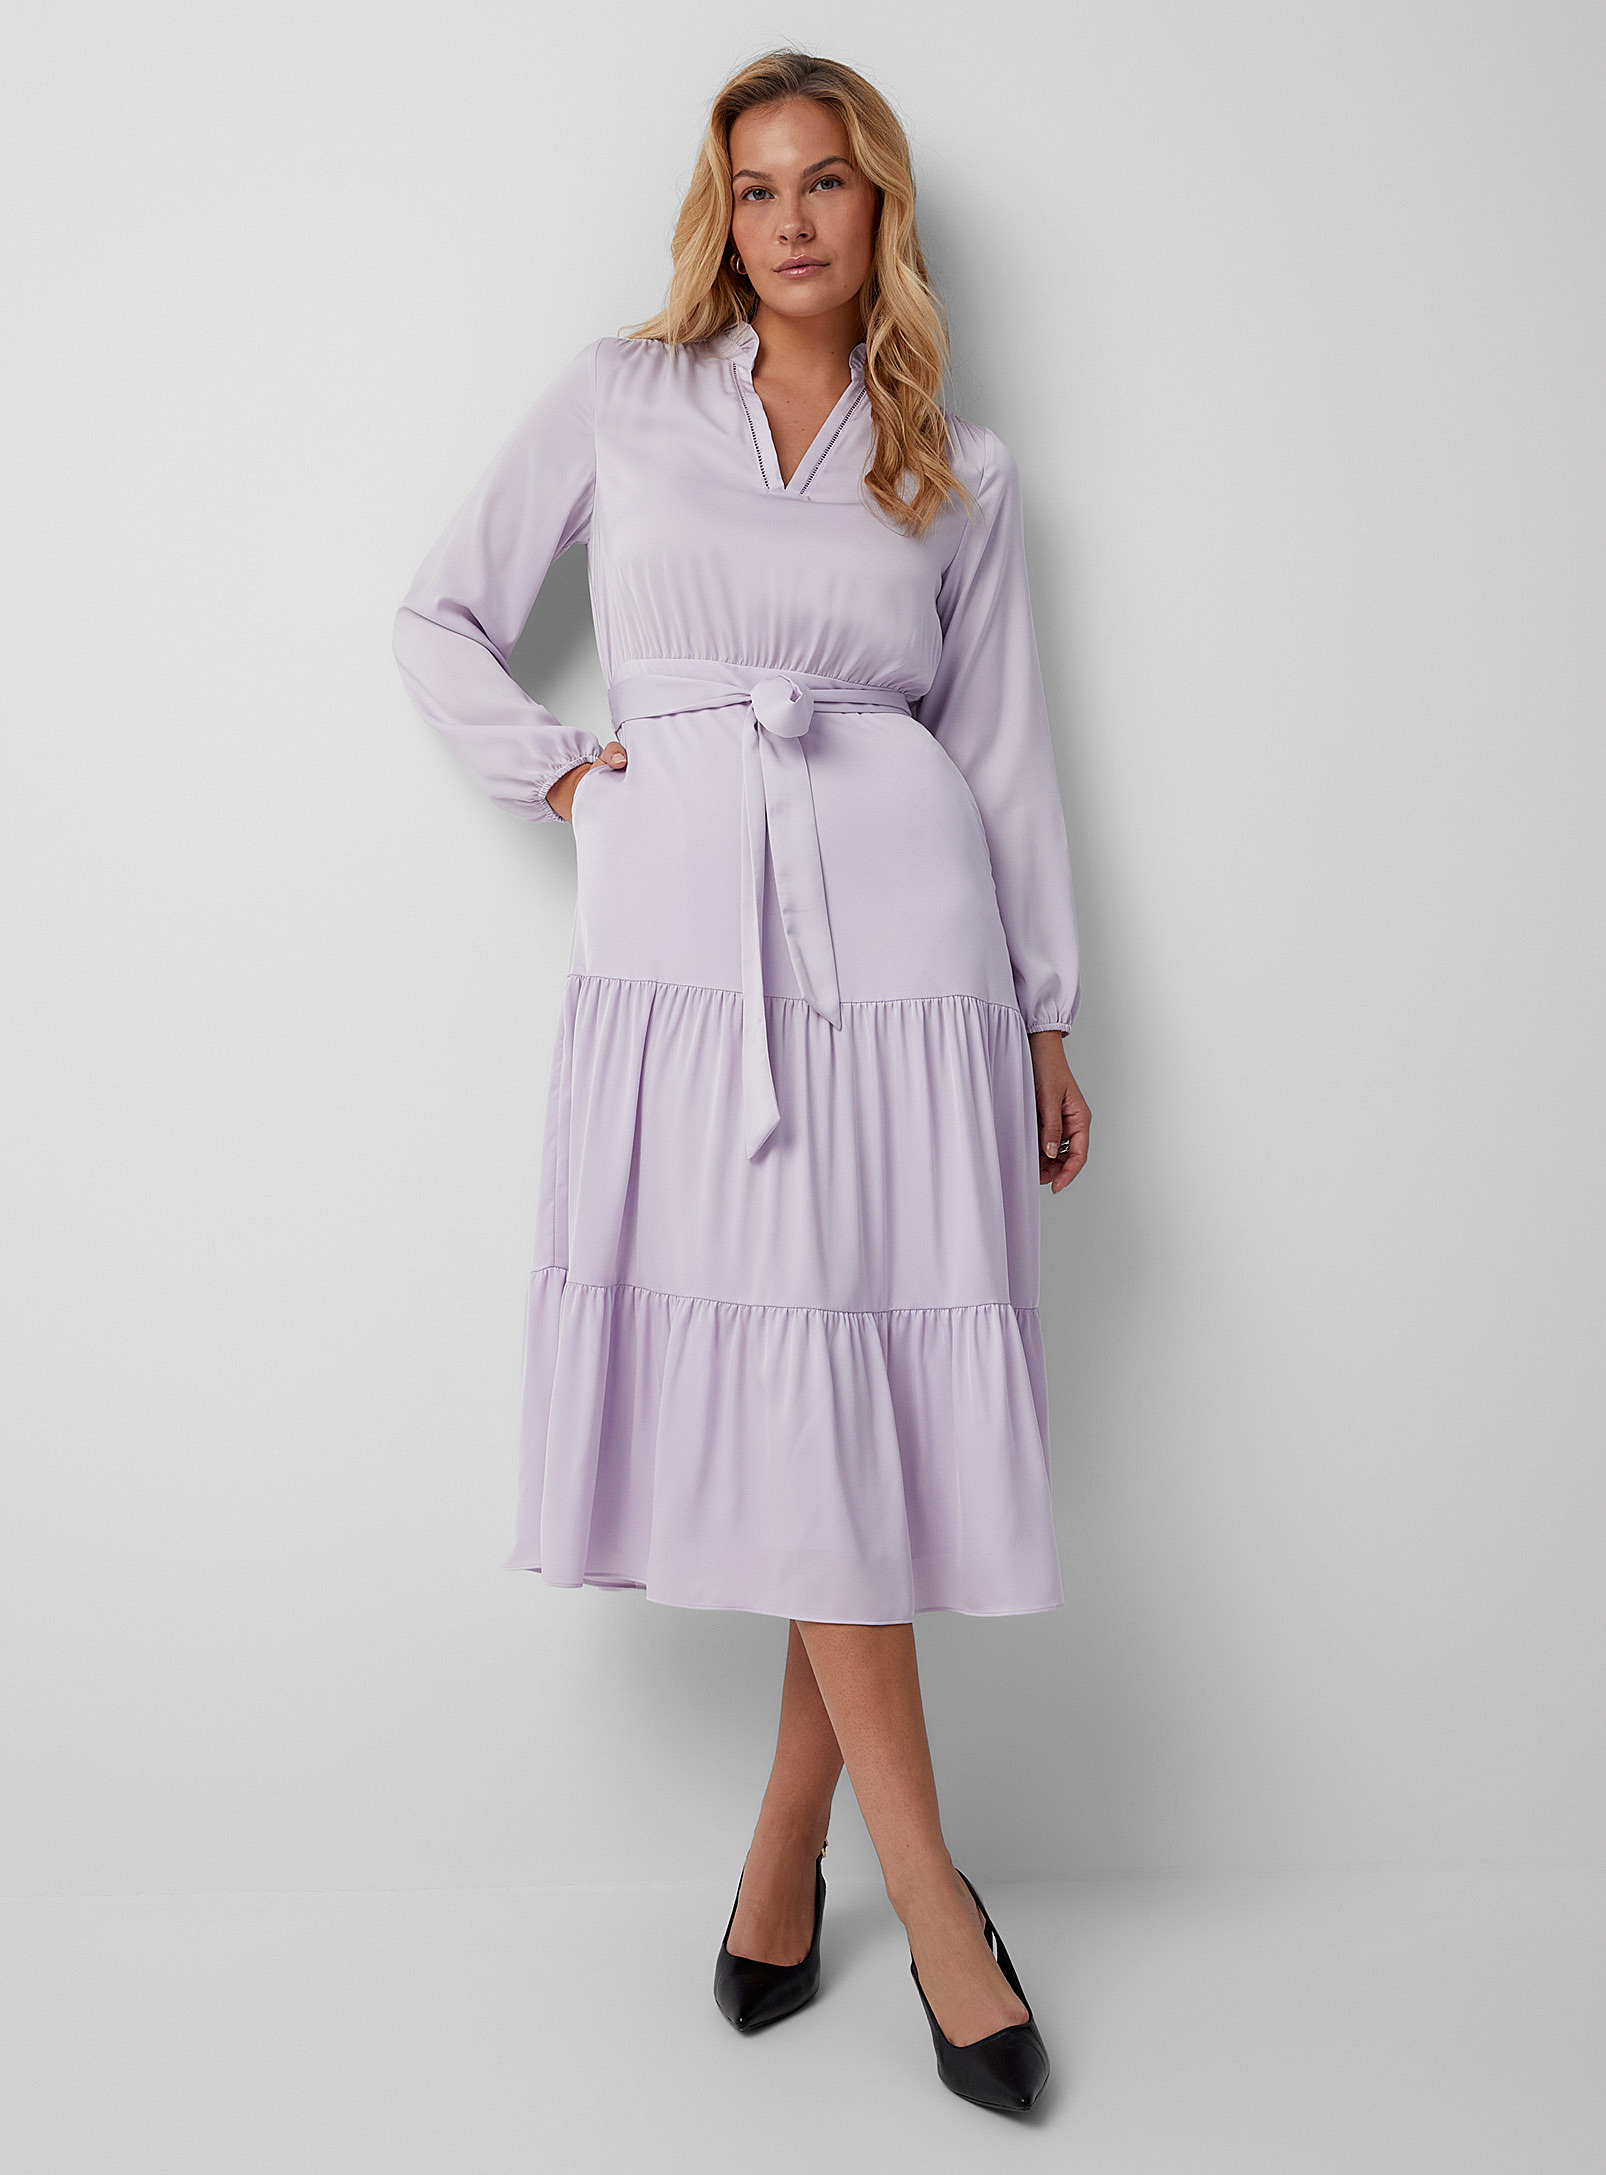 Contemporaine Ruffled Collar Tiered Satin Dress In Baby Blue